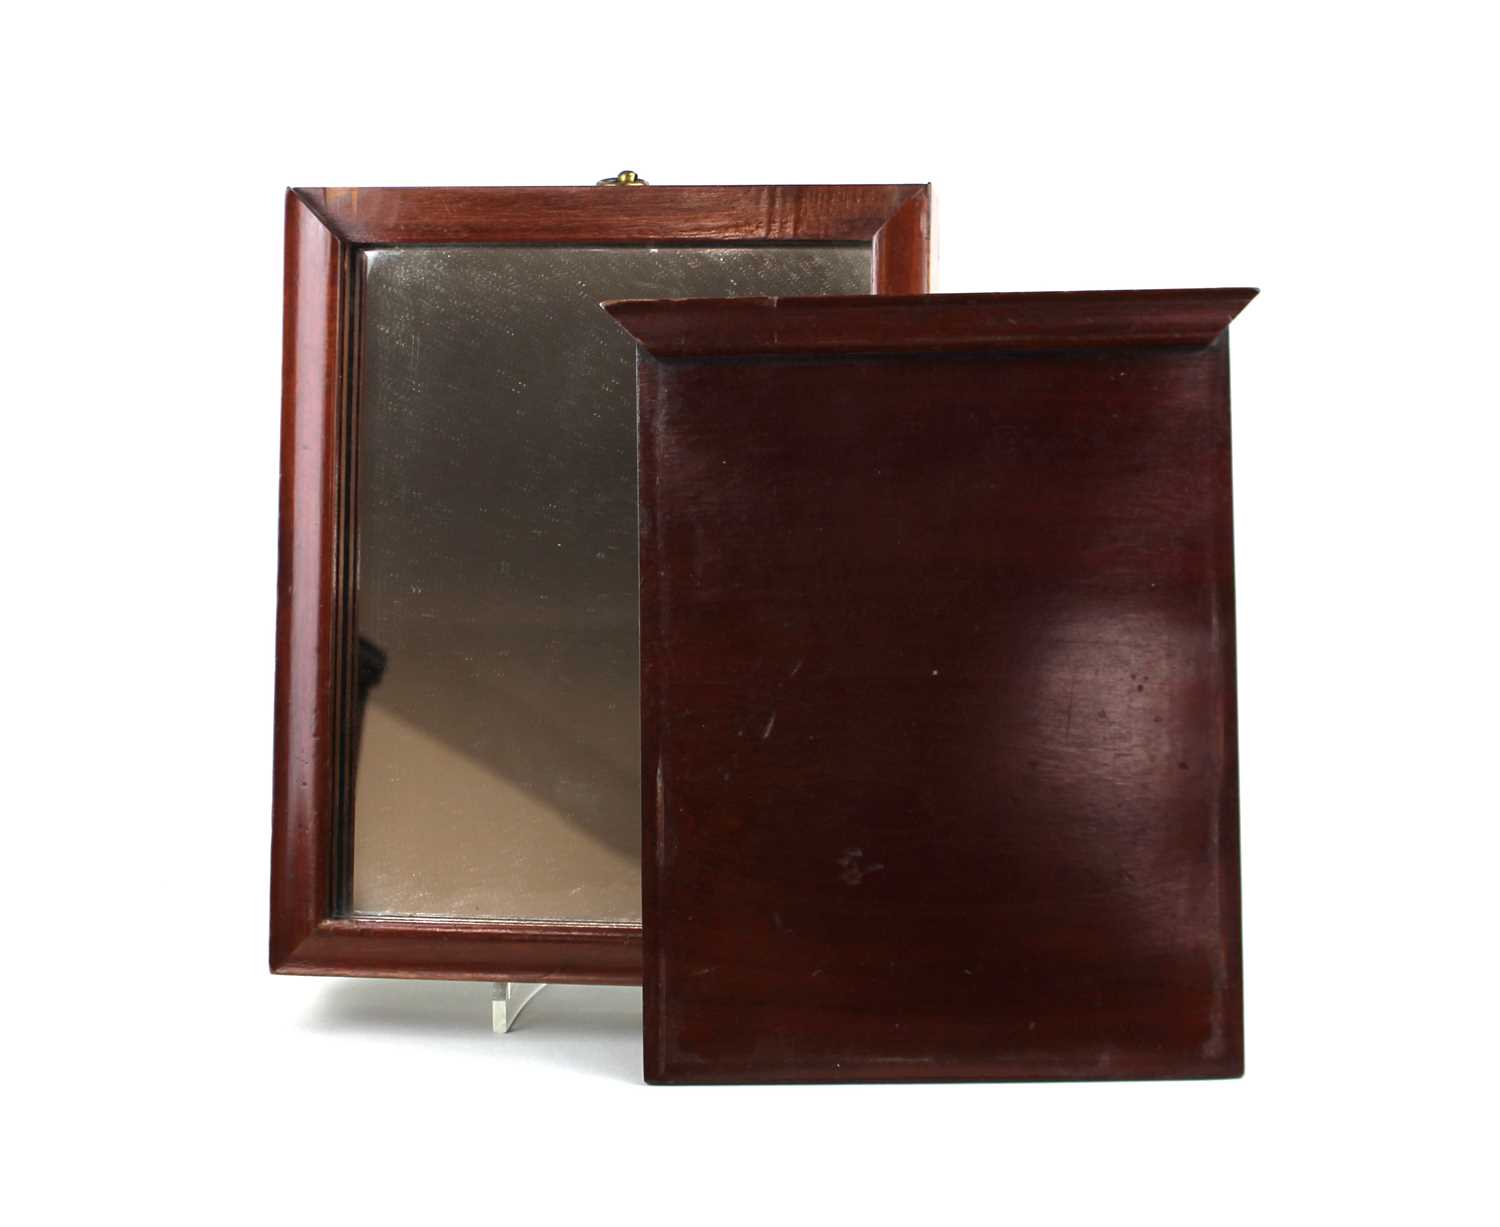 A 19th century mahogany campaign mirror with slide out cover, rear stand and brass hanging loop - Image 2 of 2